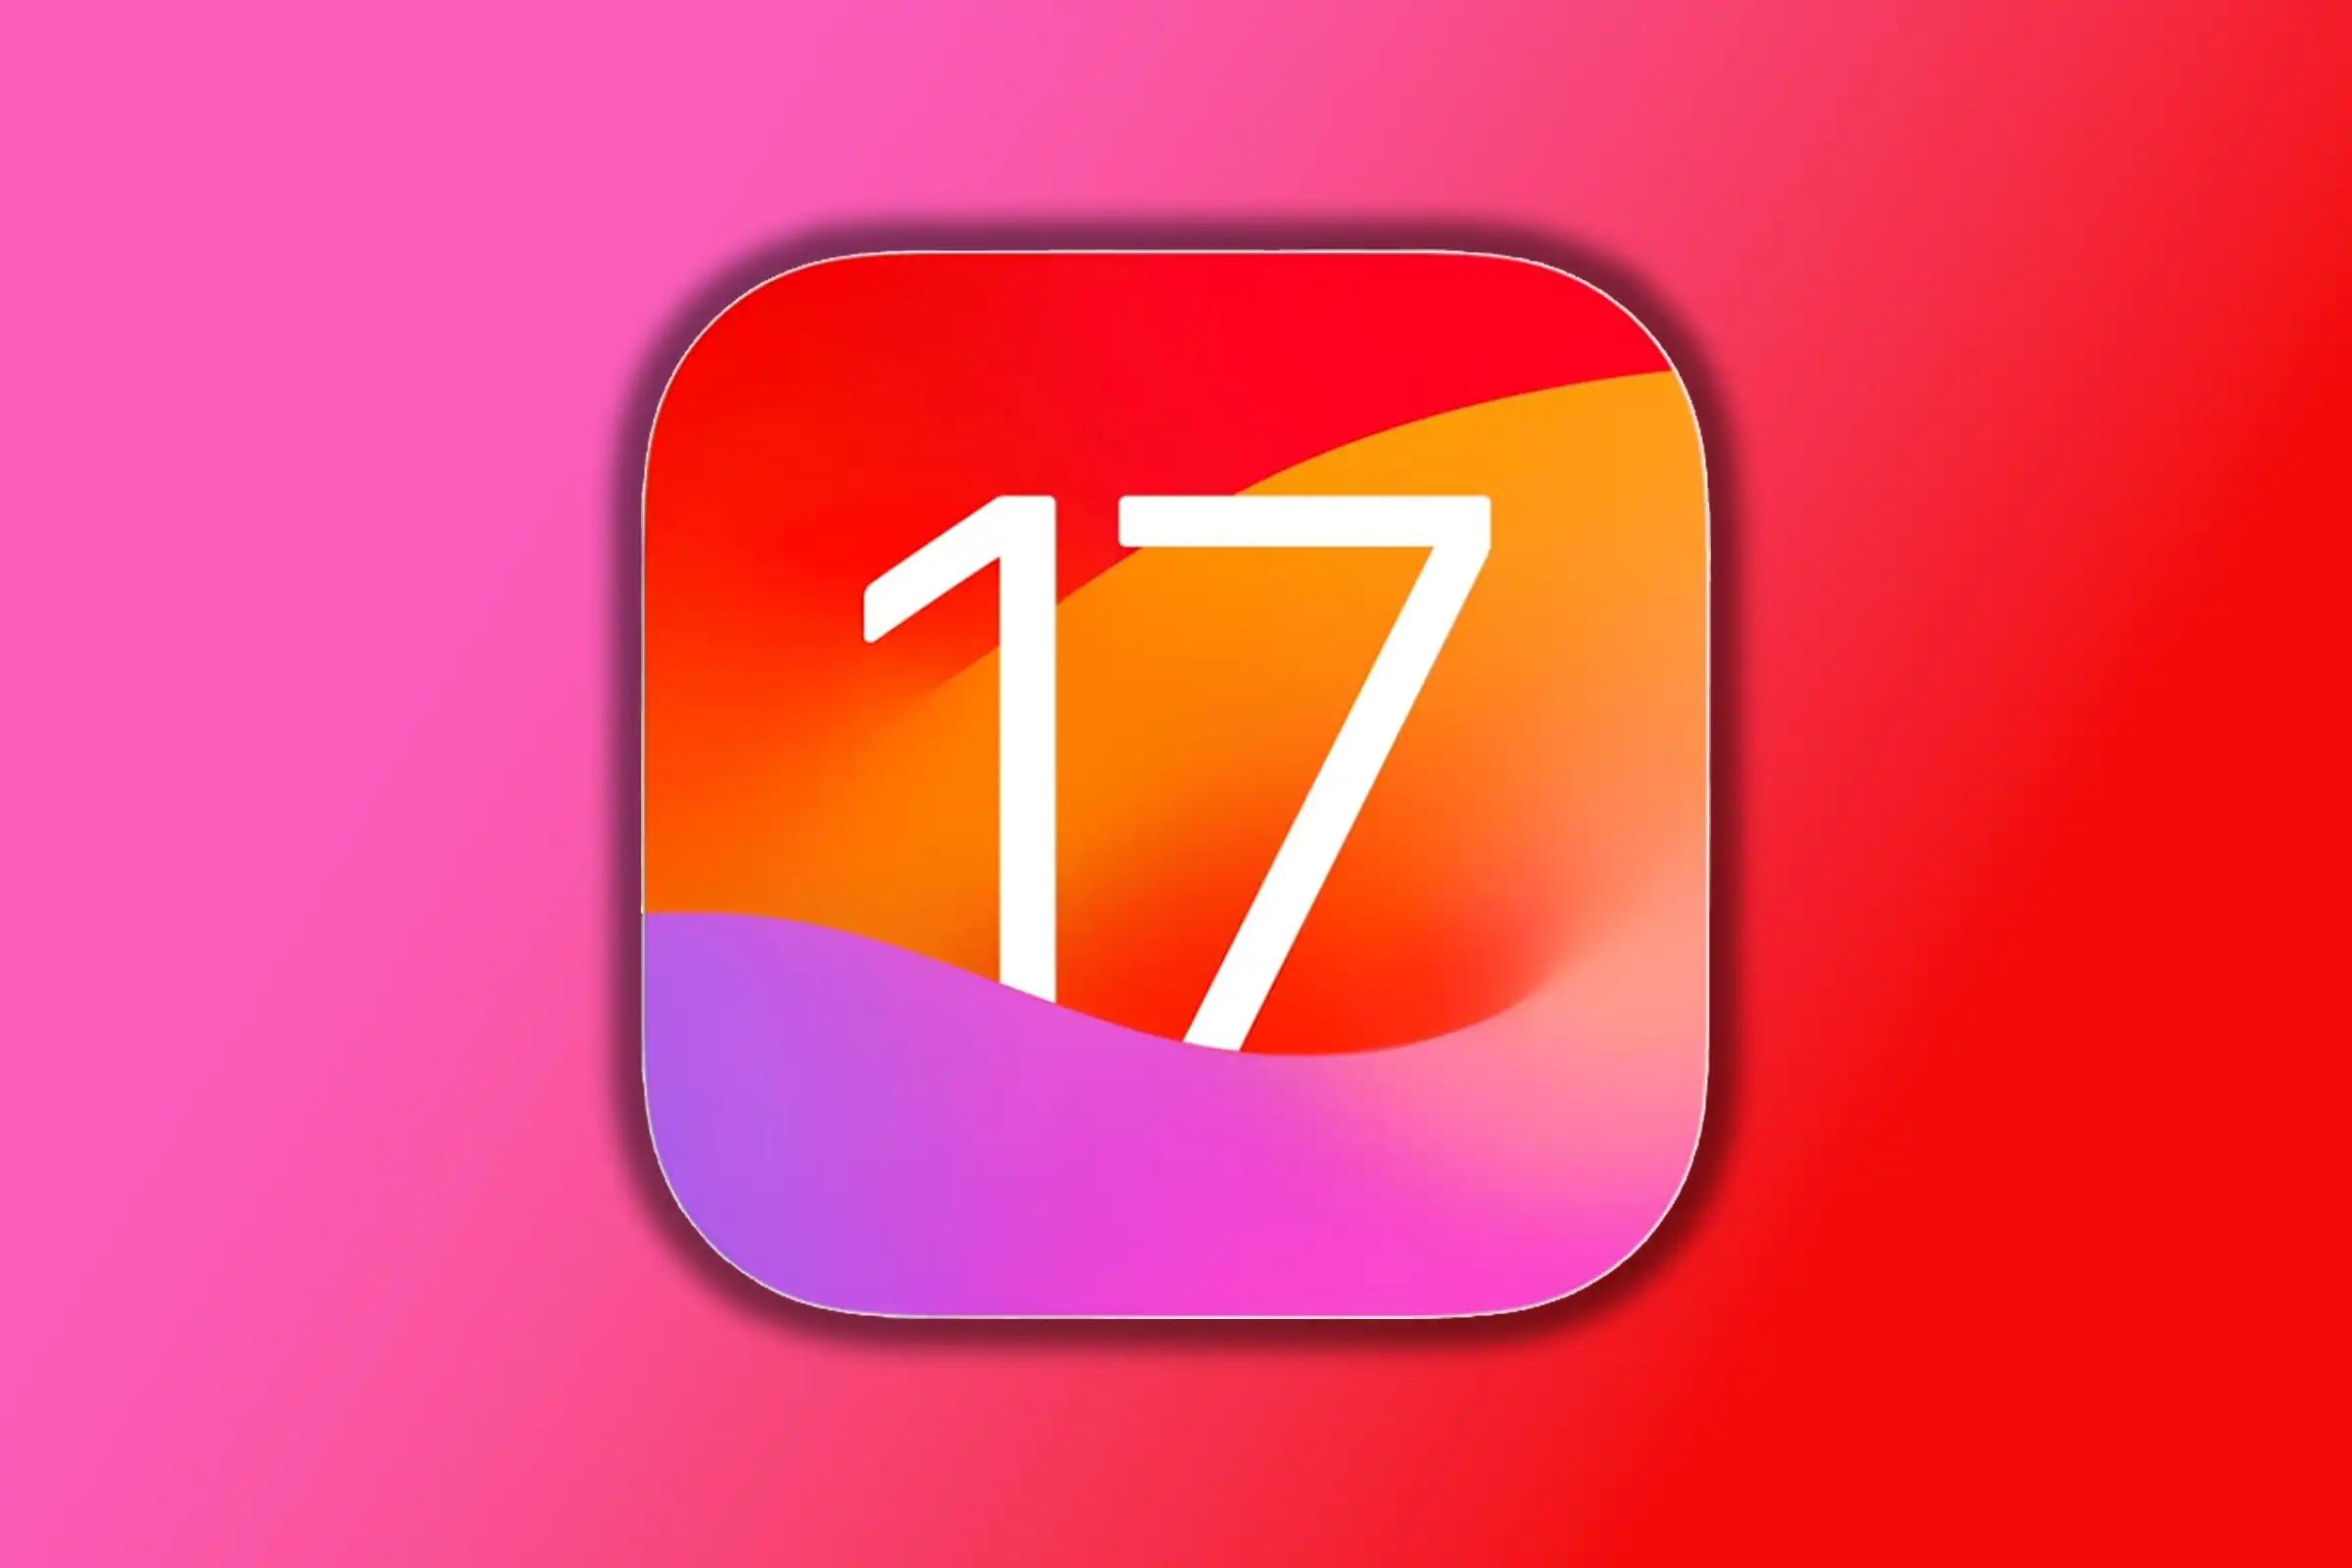 iOS 17 Superguide: Whats New in iOS 17